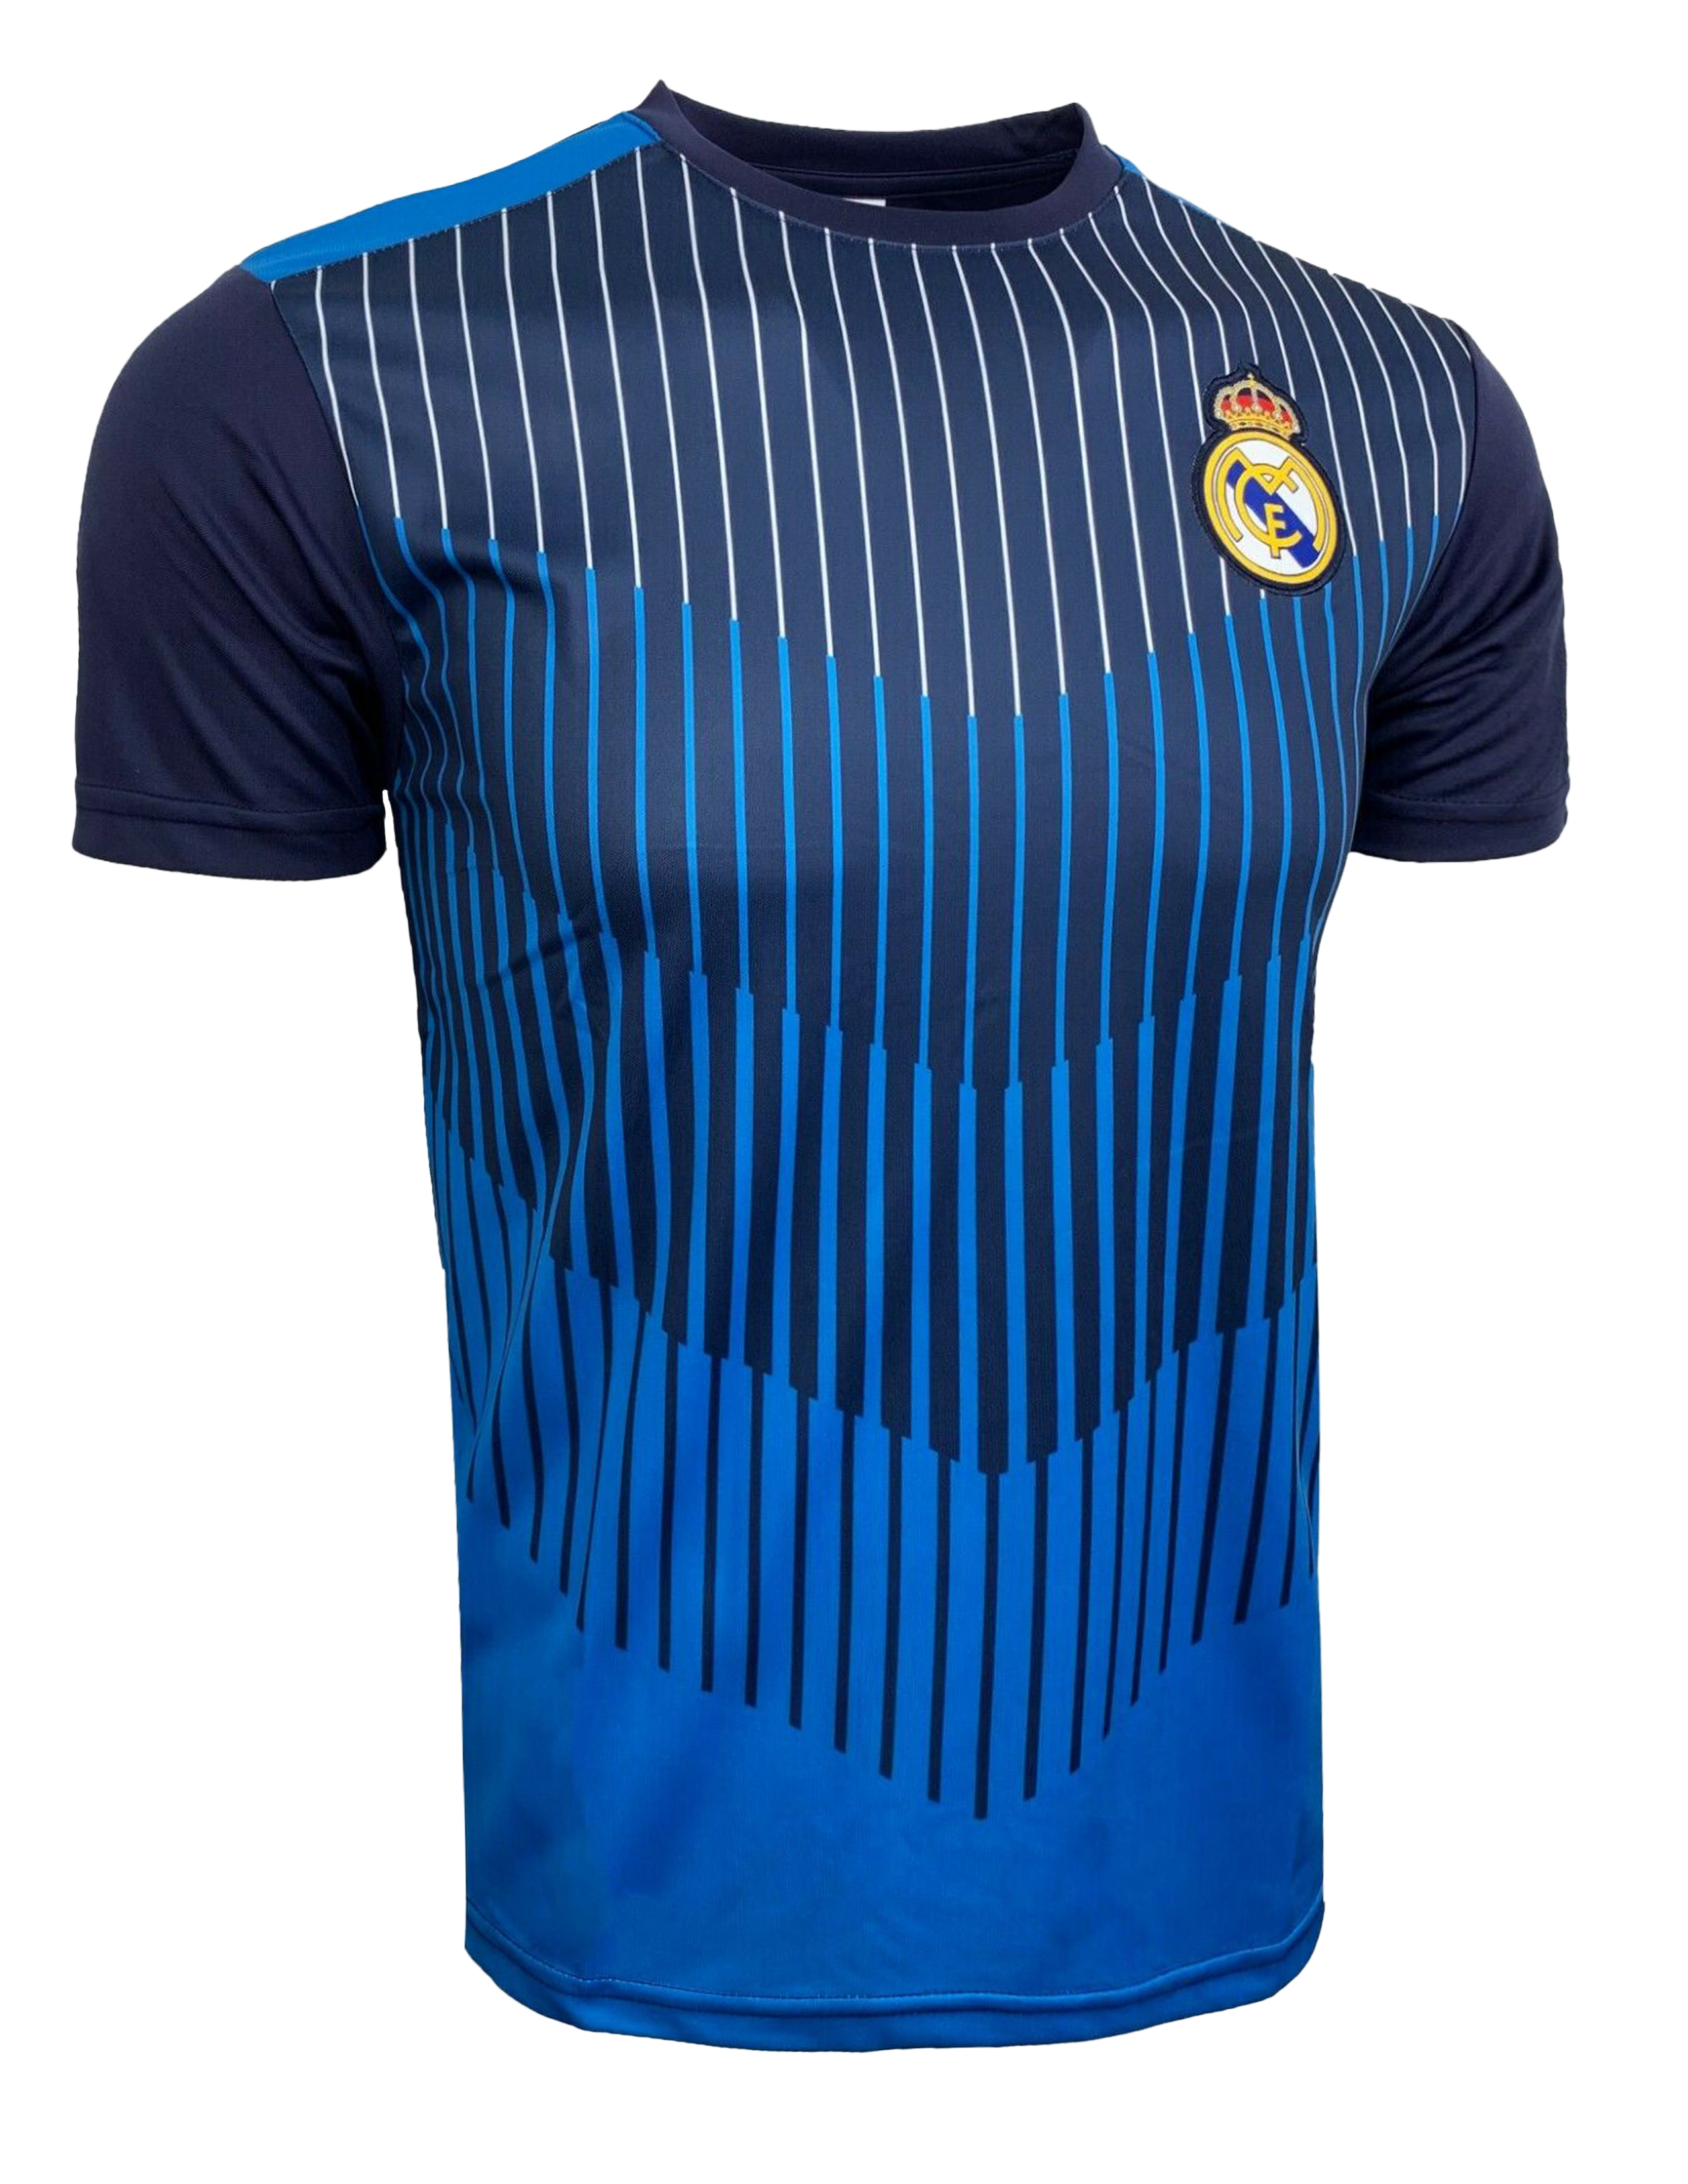 Real Madrid Training Jersey, Adult and Youth Sizes, Licensed Real Madrid Shirt (L) - image 3 of 4